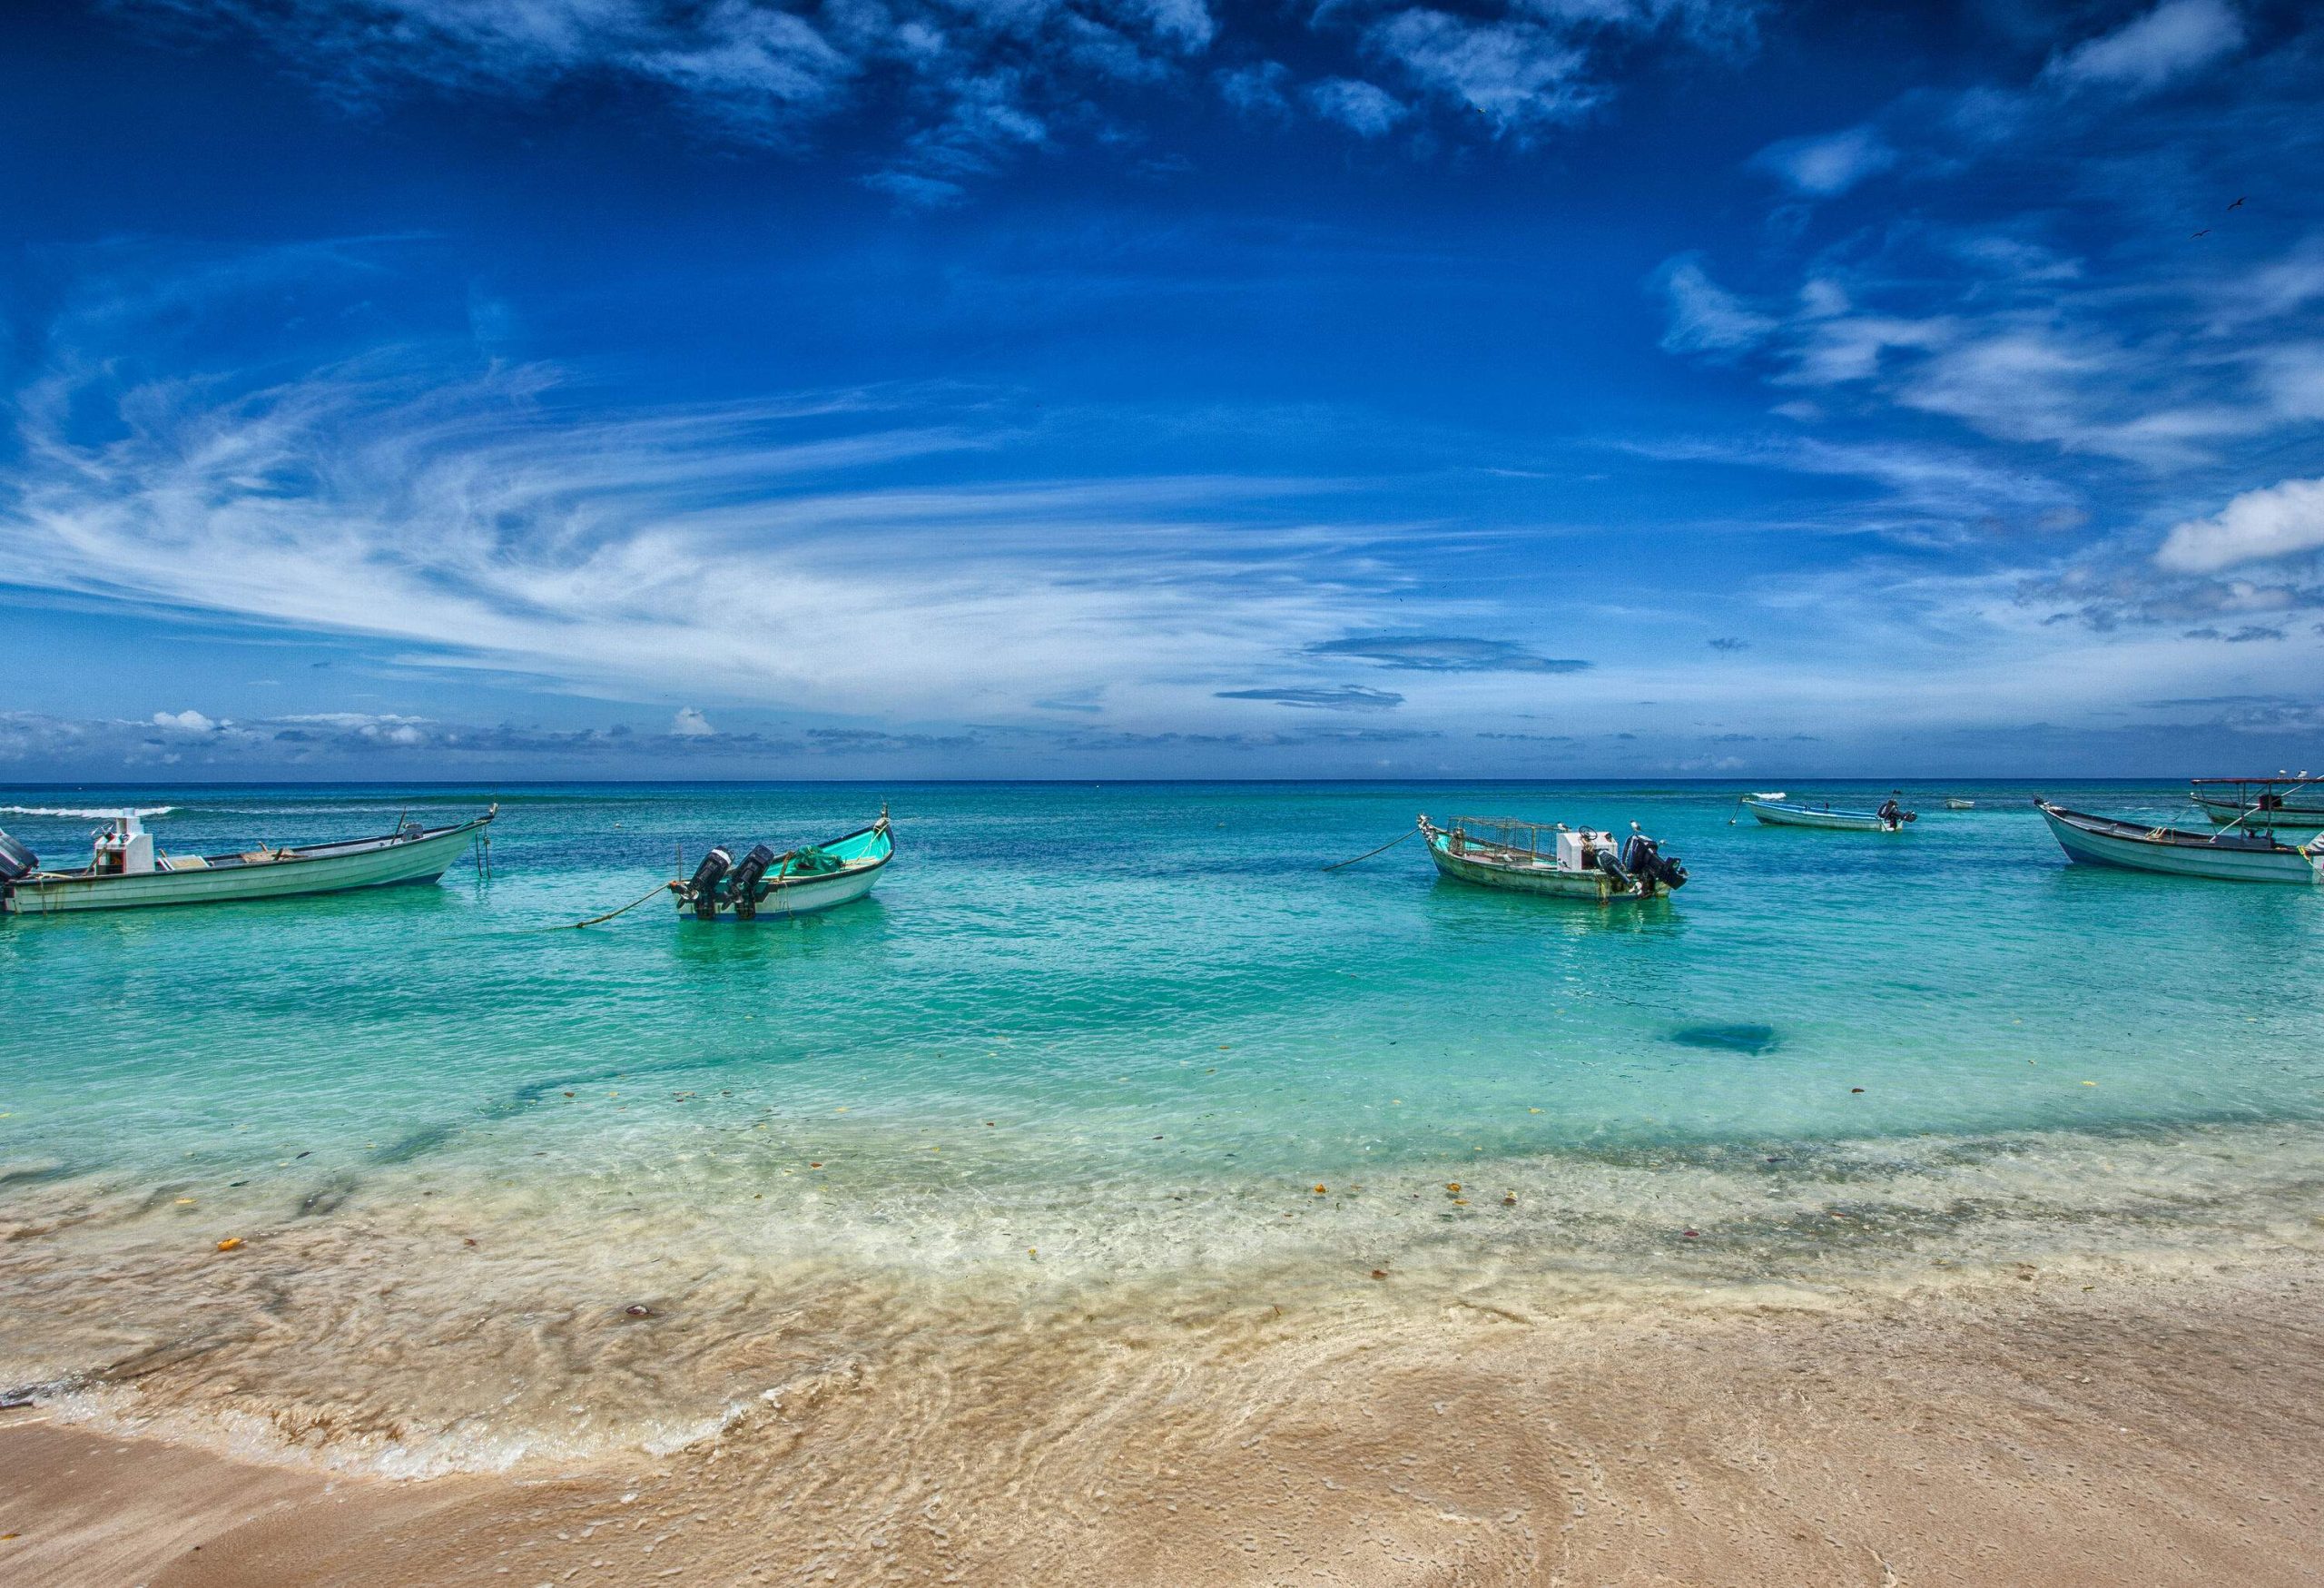 Empty fishing boats peacefully moored by the shore, with the vast expanse of the sea stretching into the horizon, while swirling clouds added a touch of drama to the tranquil scene.